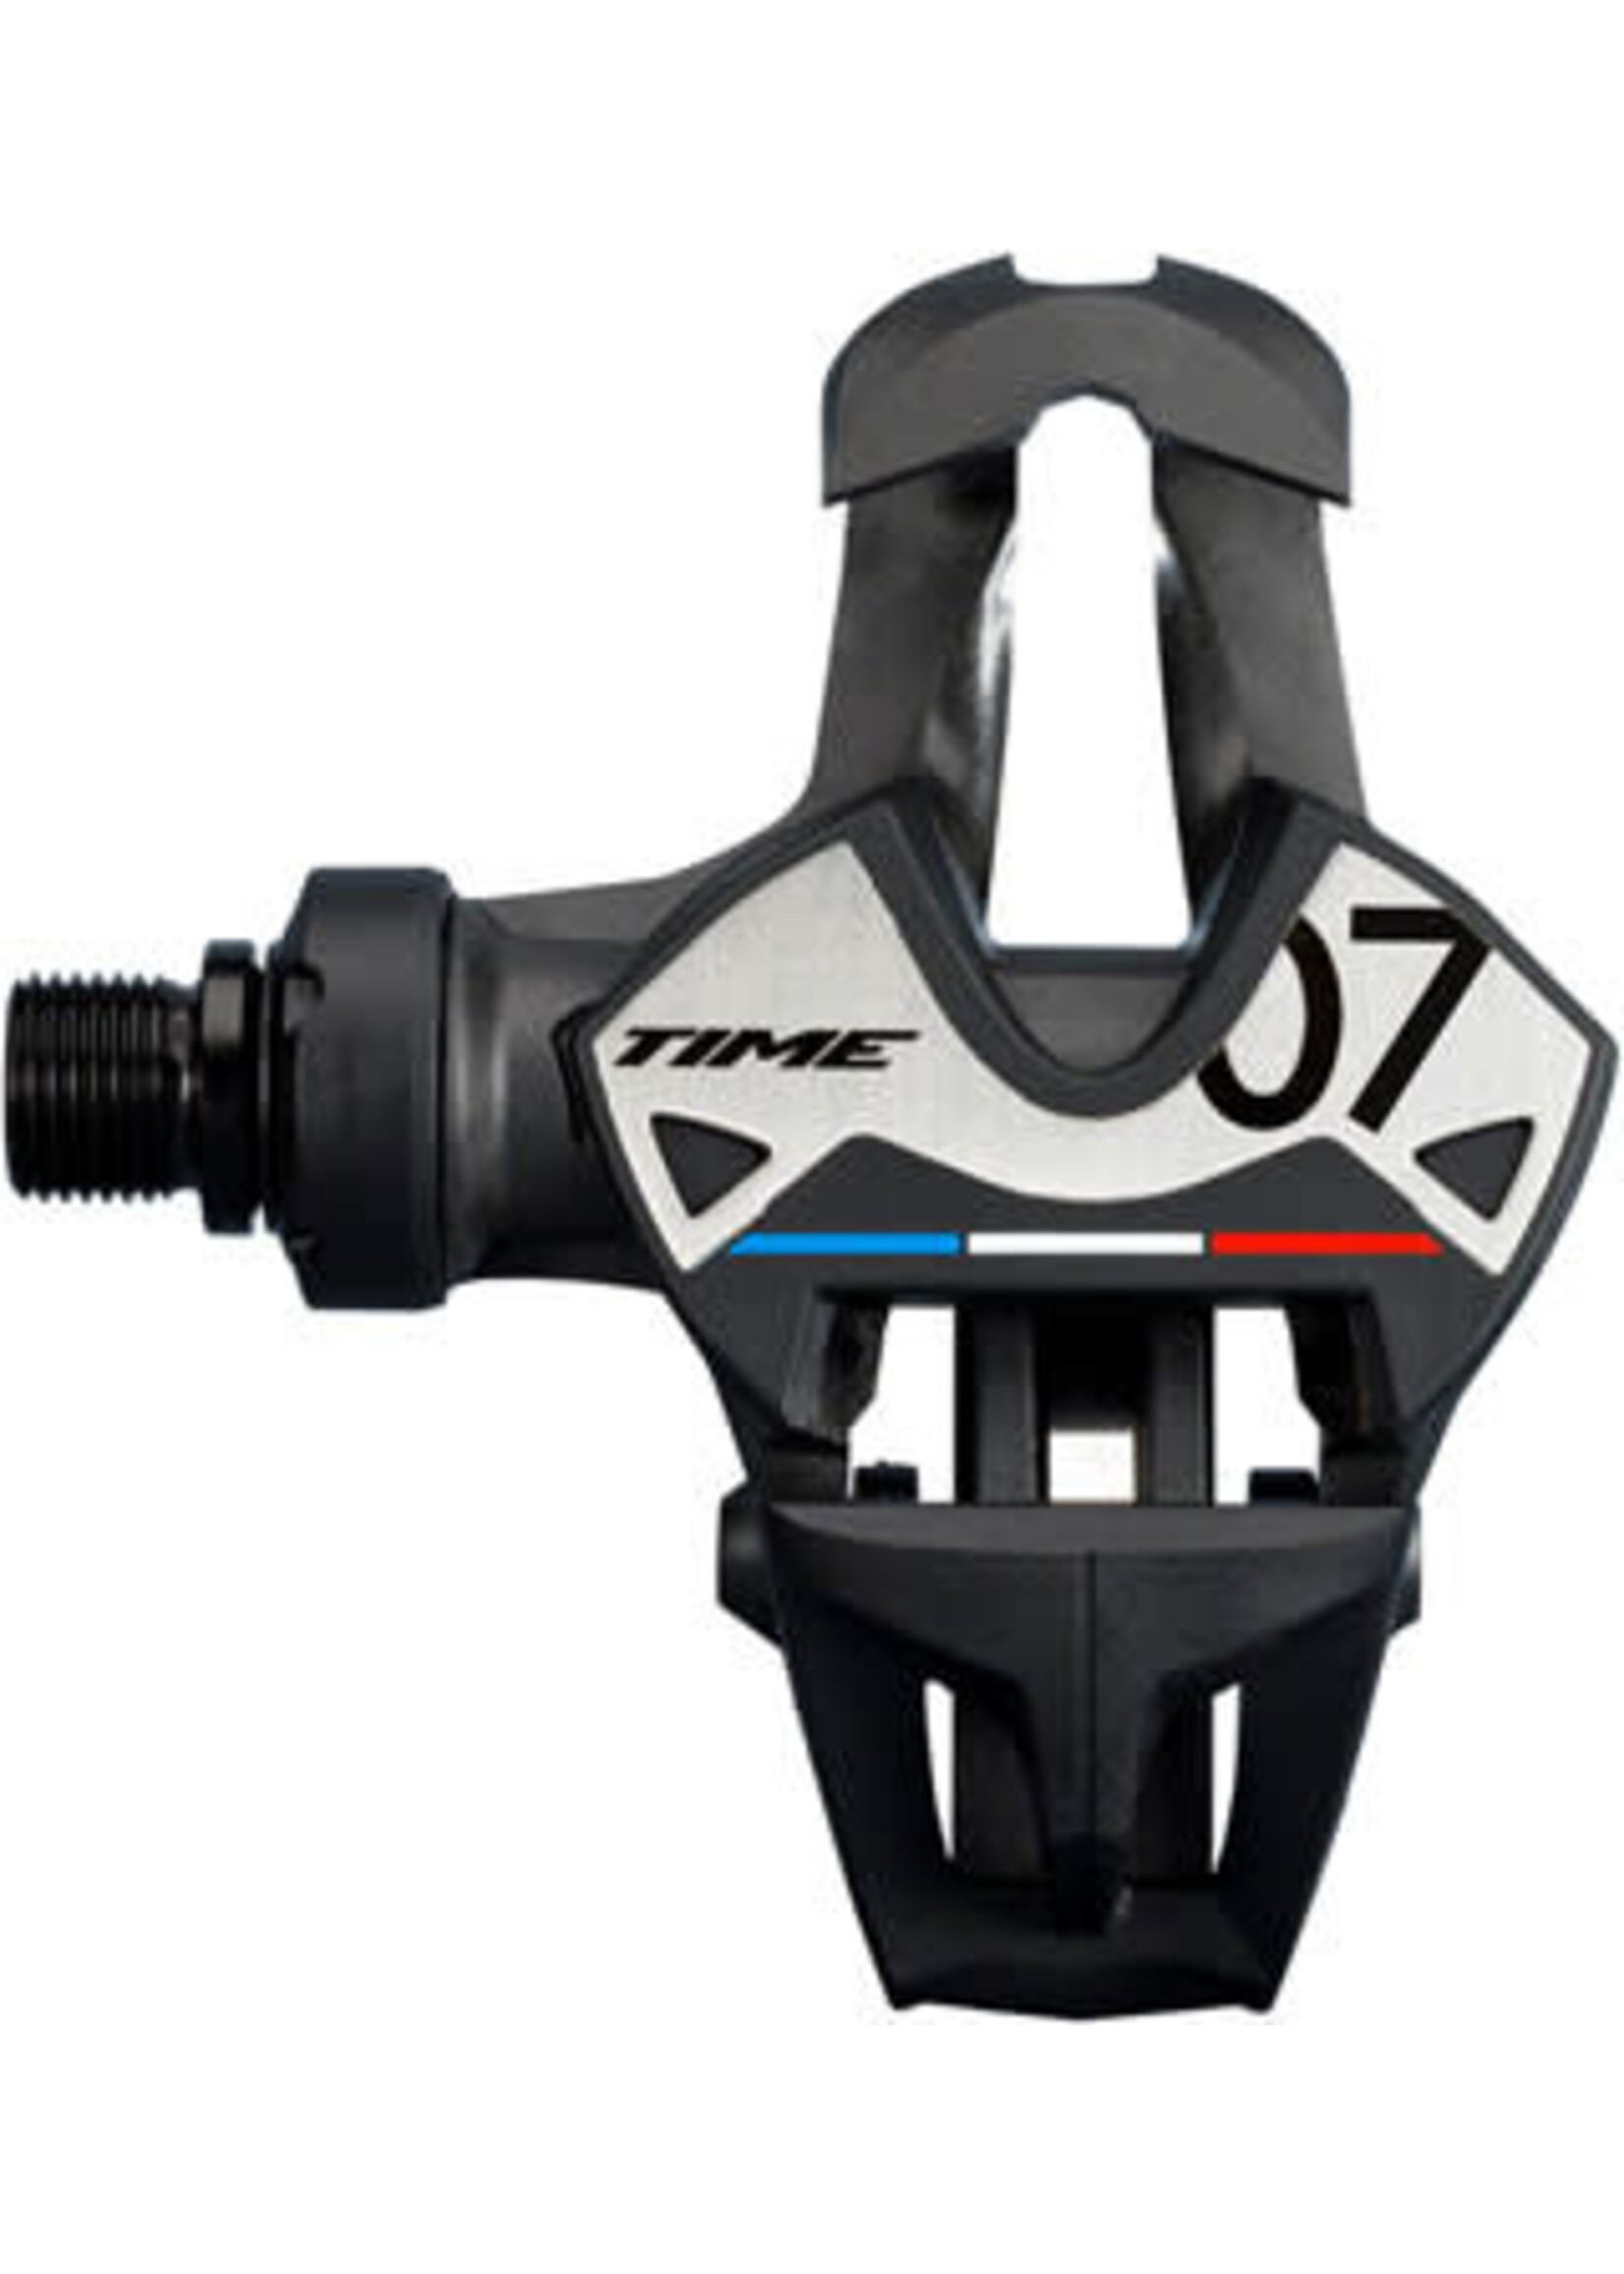 Time Time XPRESSO 7 Pedals - Single Sided Clipless , Carbon, 9/16", Black